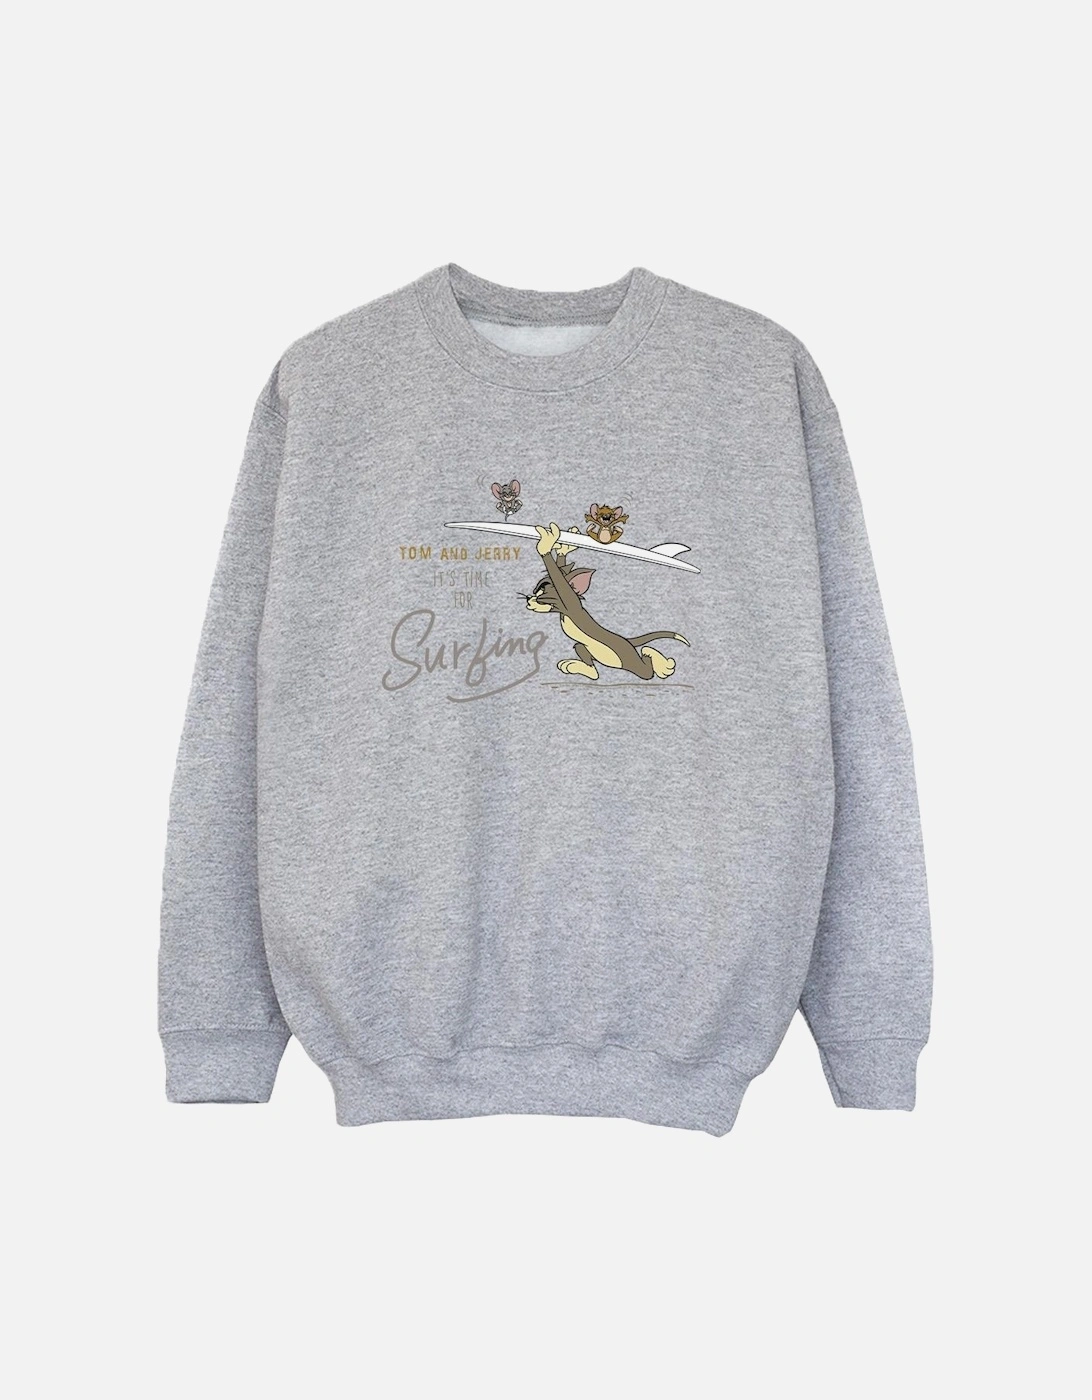 Tom And Jerry Boys It?'s Time For Surfing Sweatshirt, 4 of 3